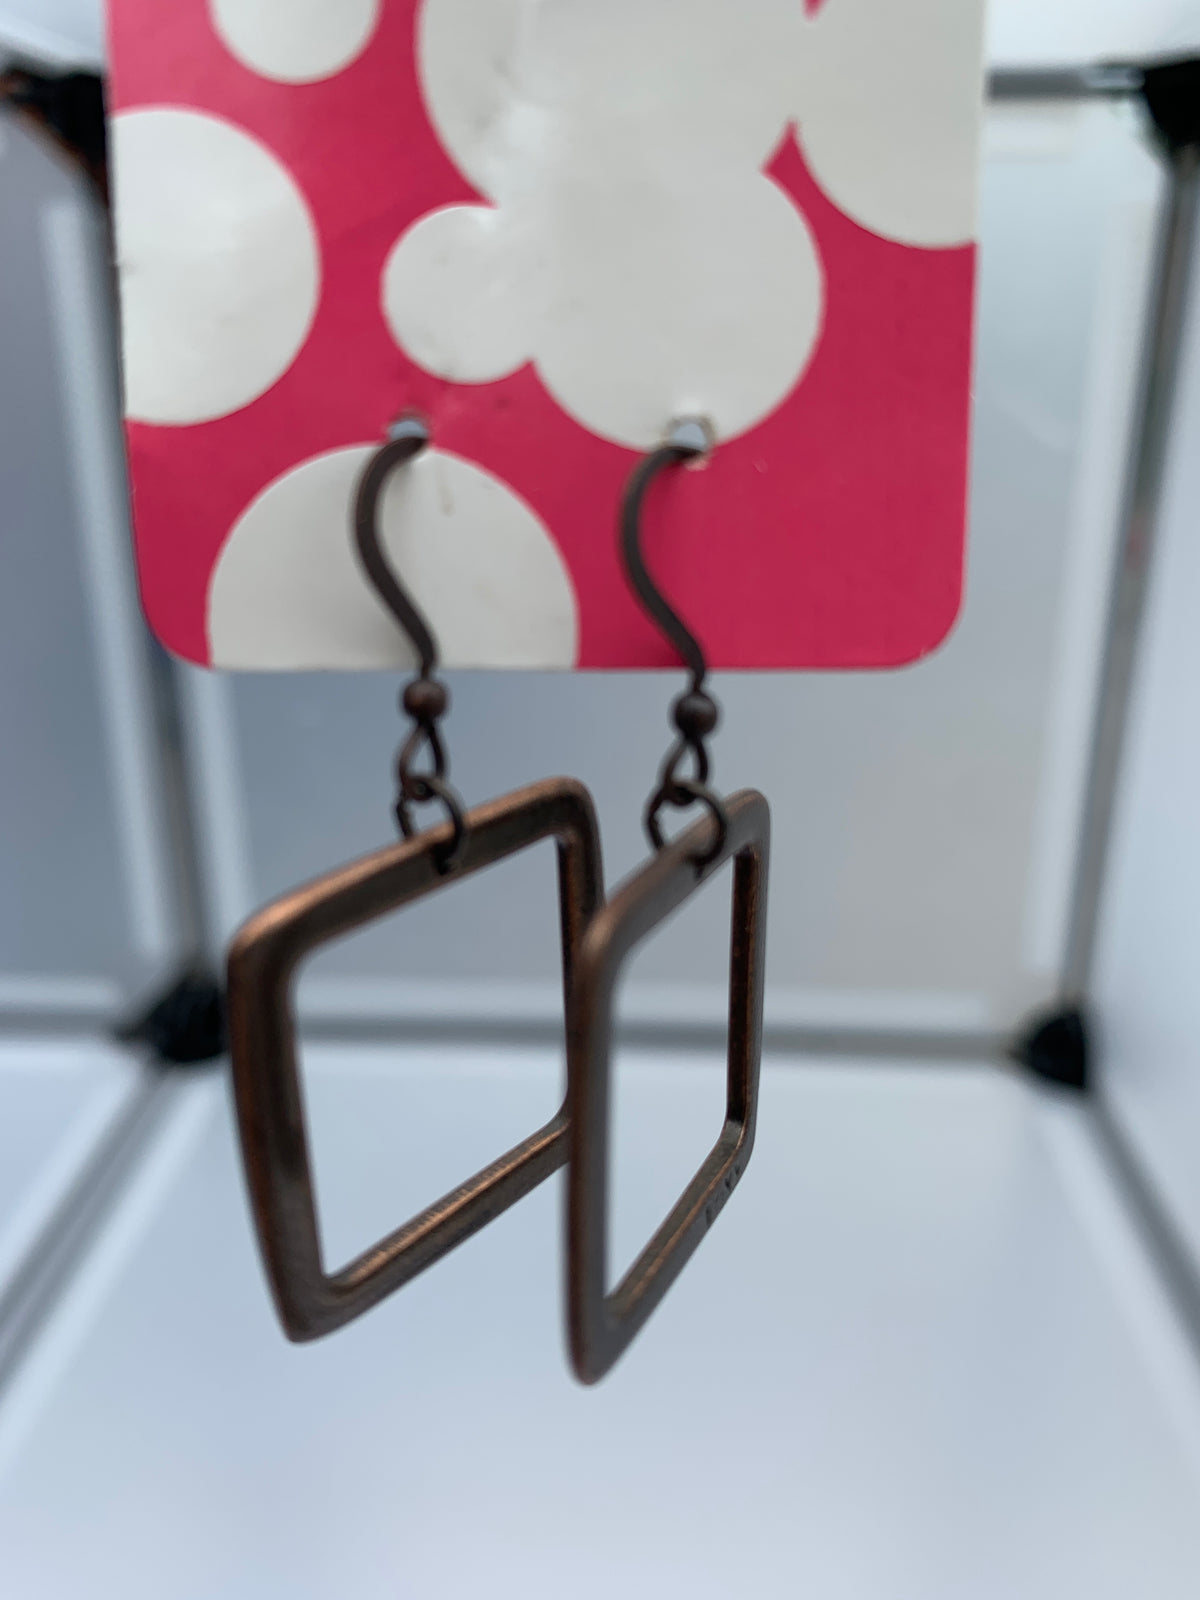 Square cut out on a hook